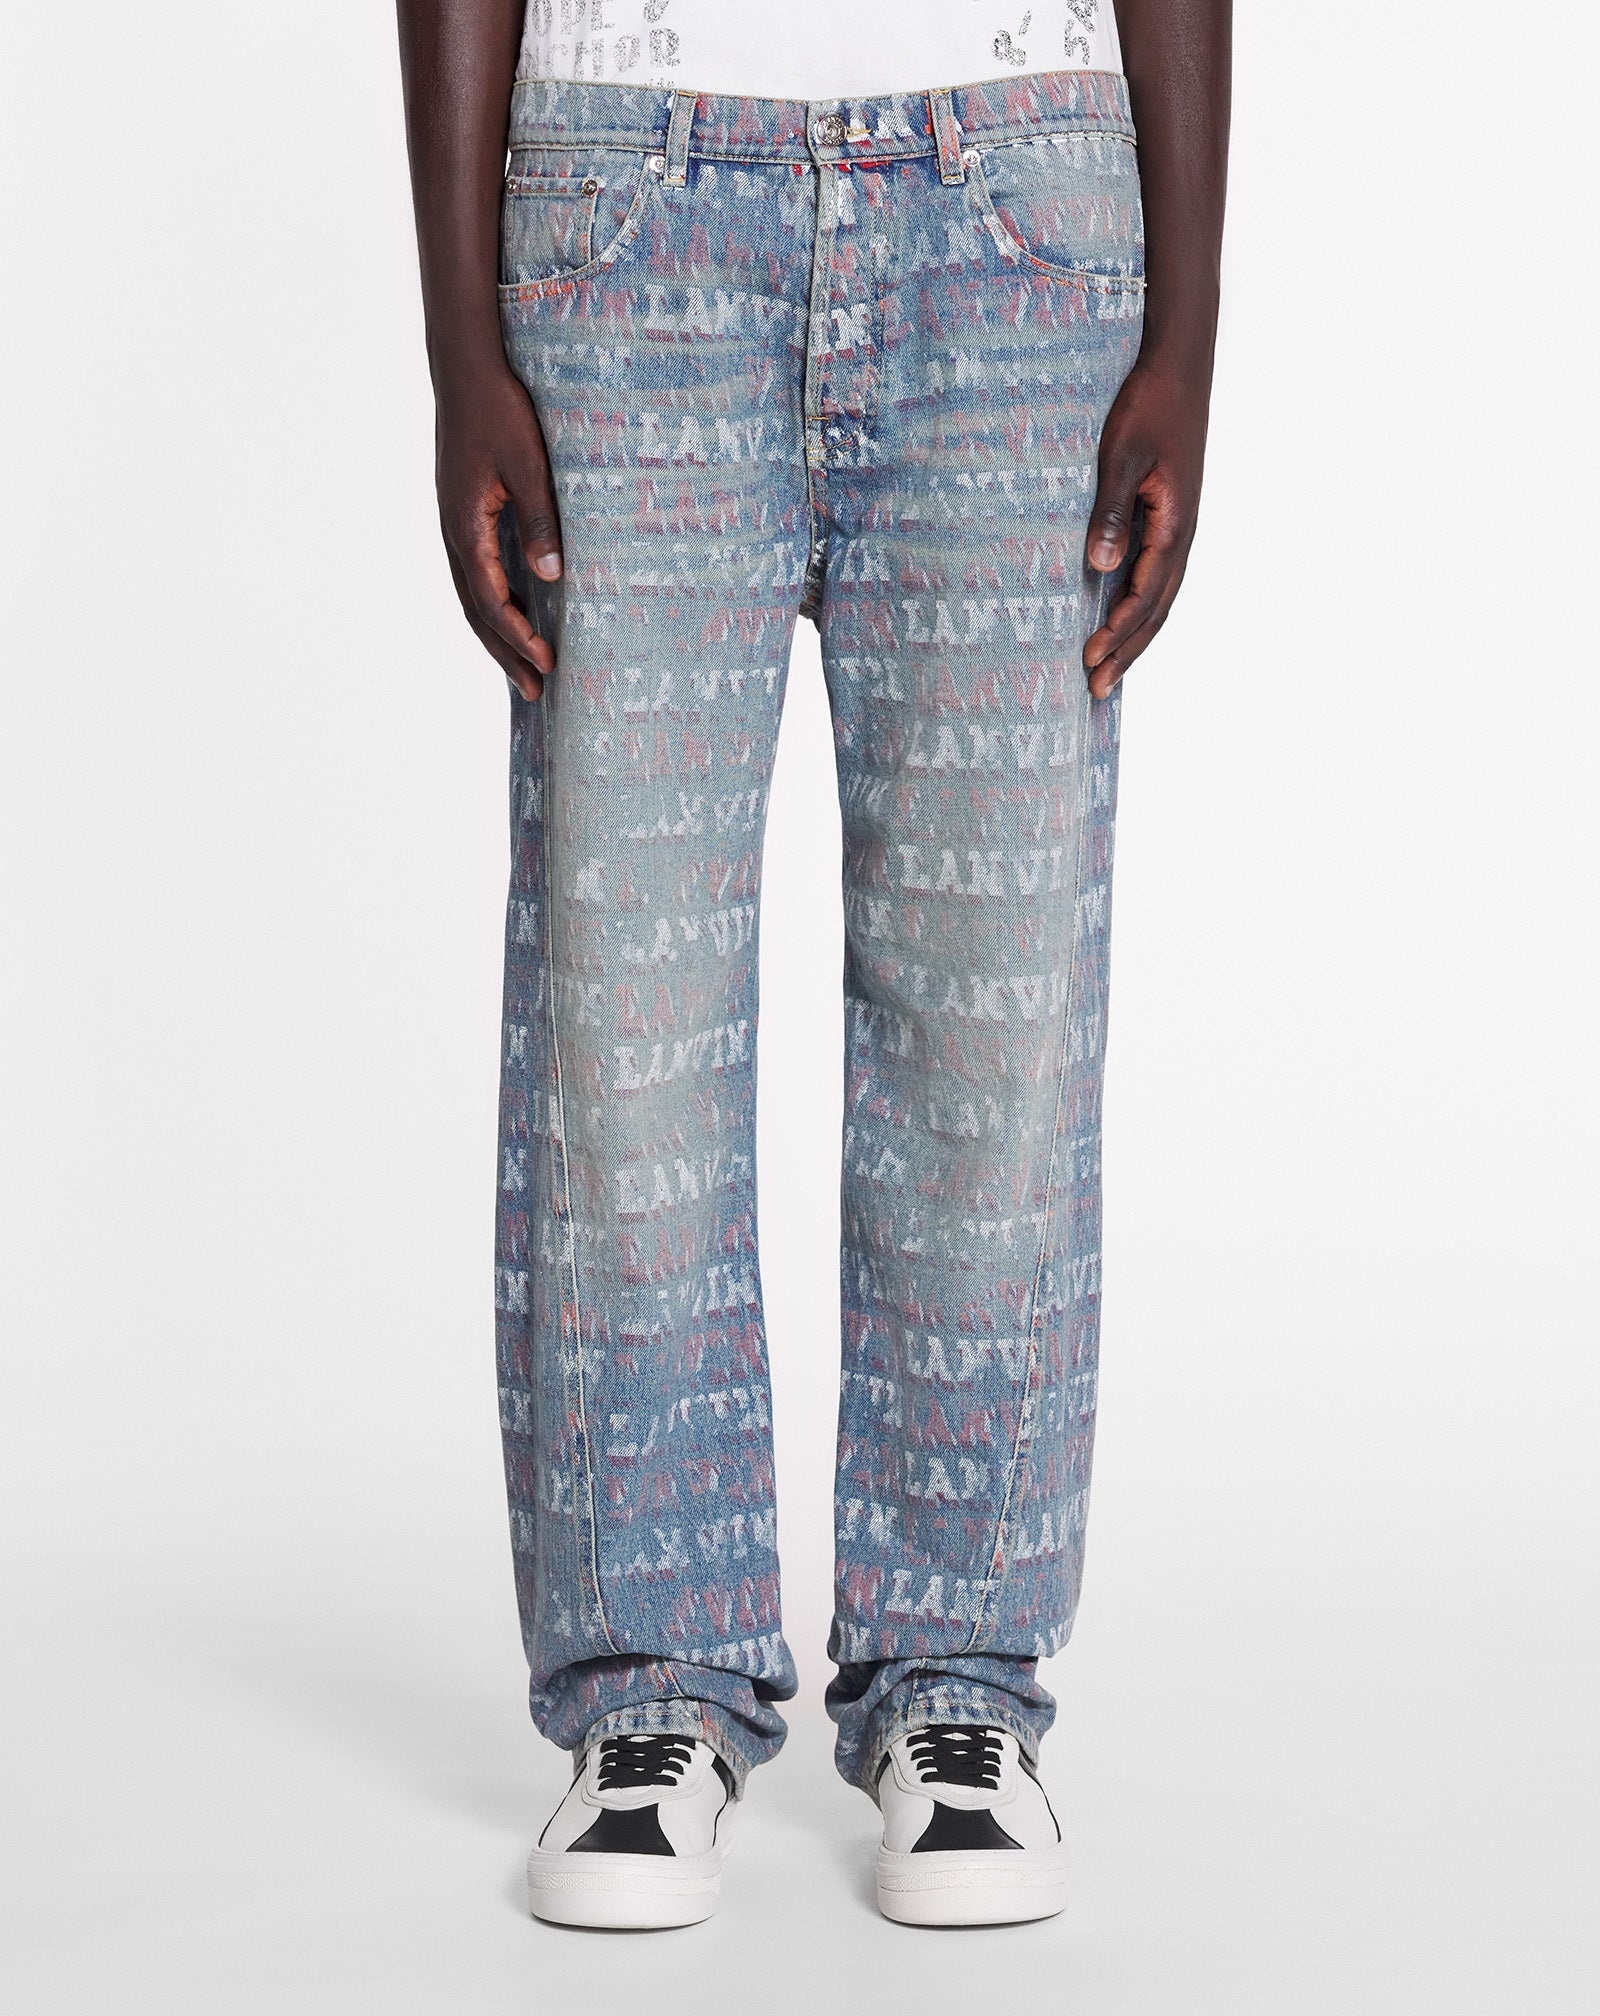 LANVIN X FUTURE STRAIGHT FIT PRINTED PANTS FOR MEN - 3